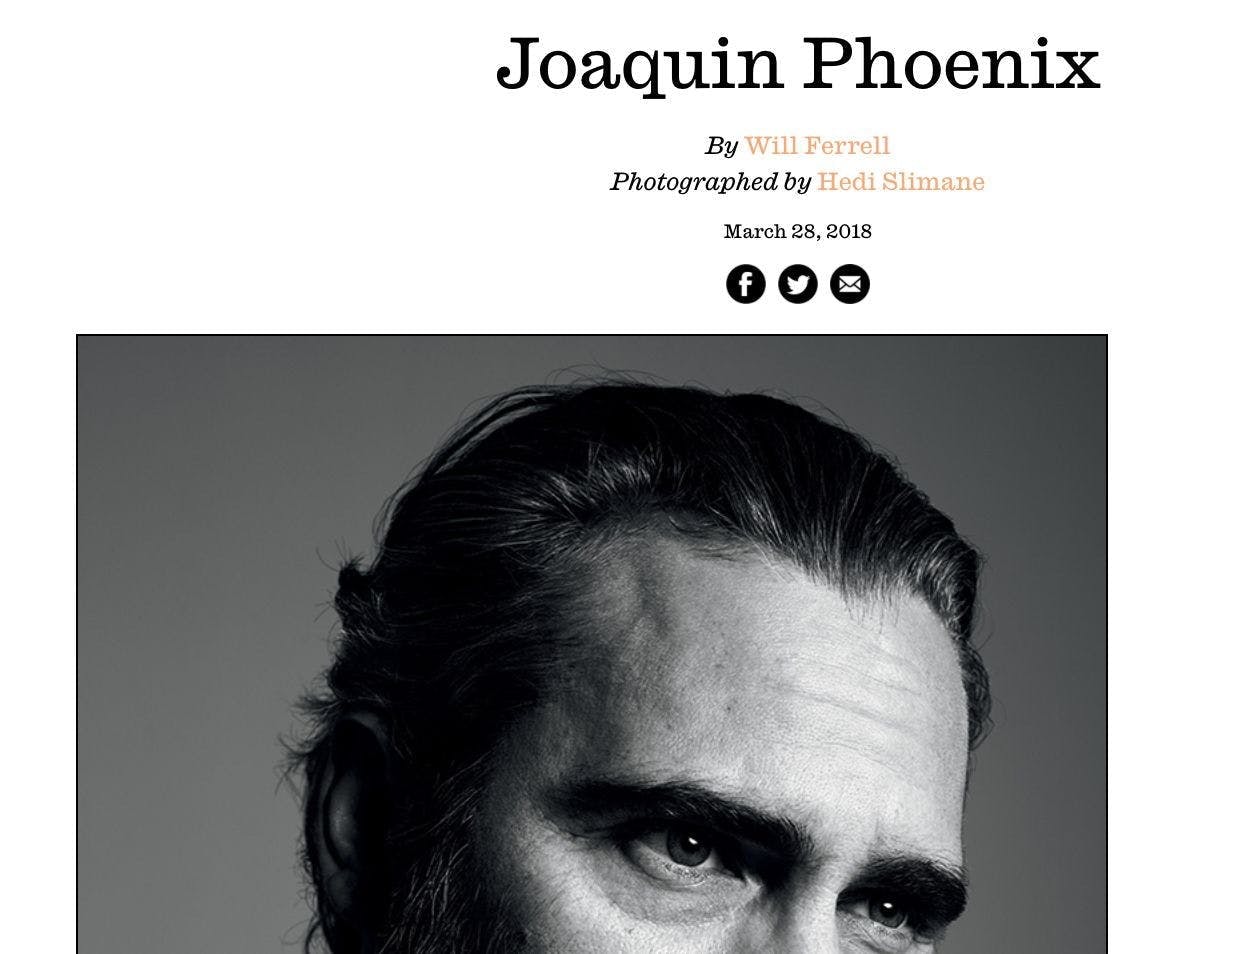 featured image - The 59 Questions From the Will Ferrell Joaquin Phoenix Interview